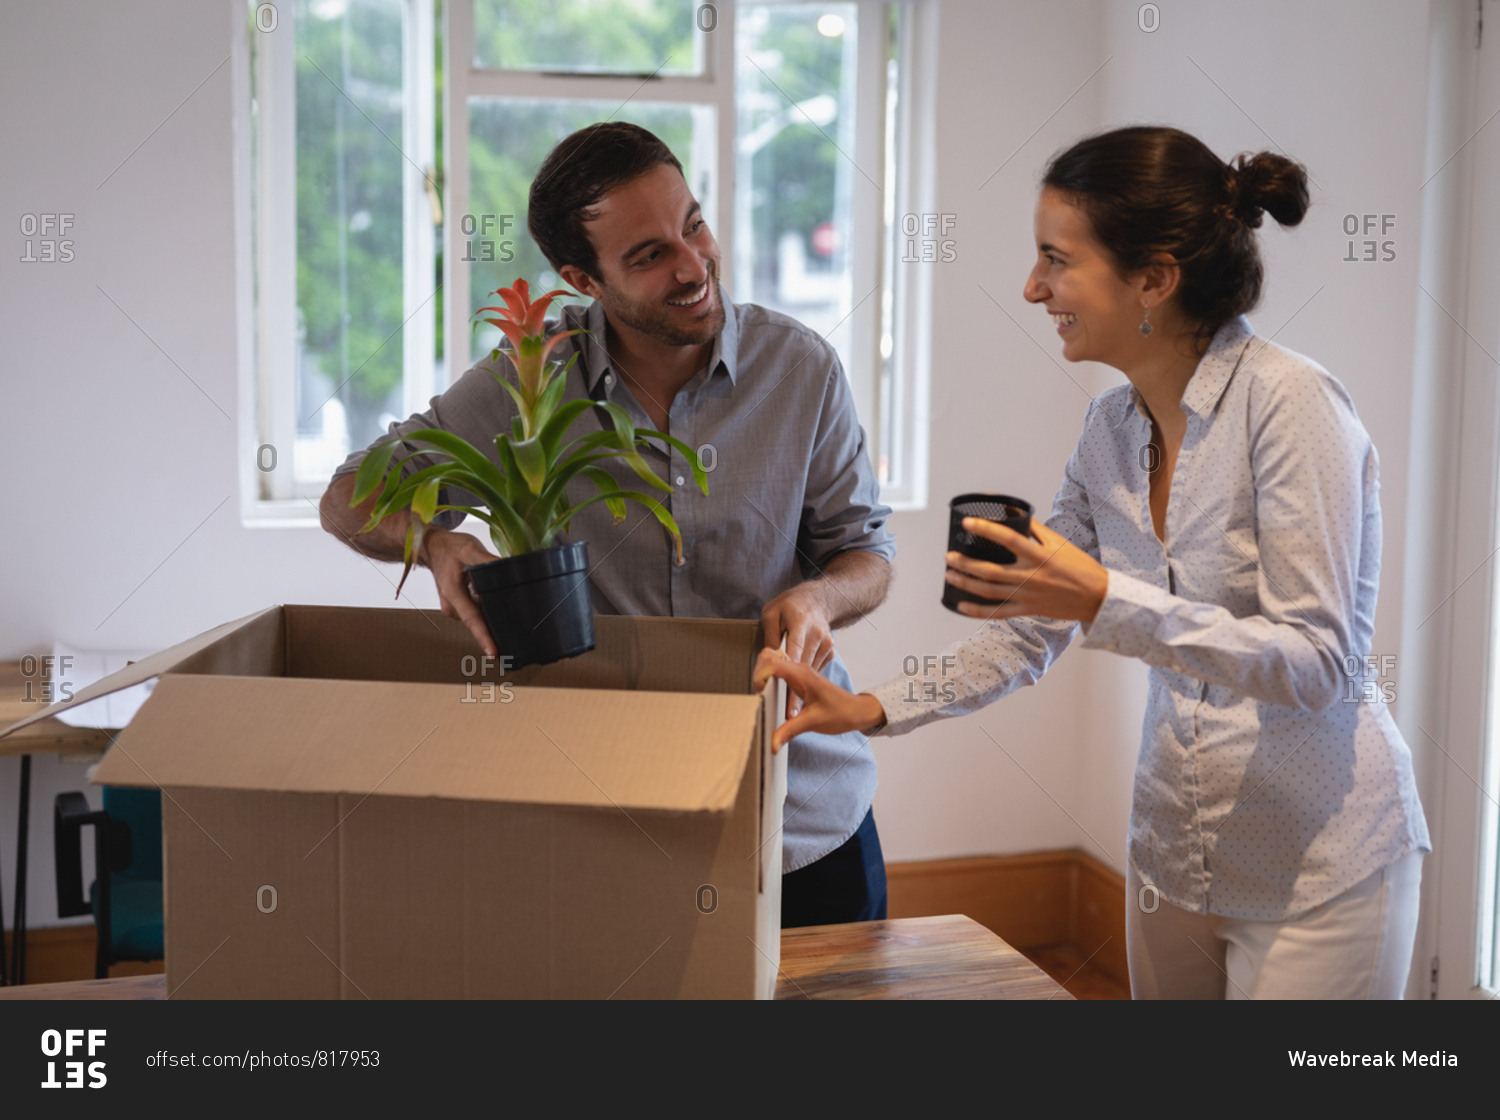 Front view of Caucasian businessman and mixed-race Businesswoman interacting with each other while packing cardboard boxes in the office